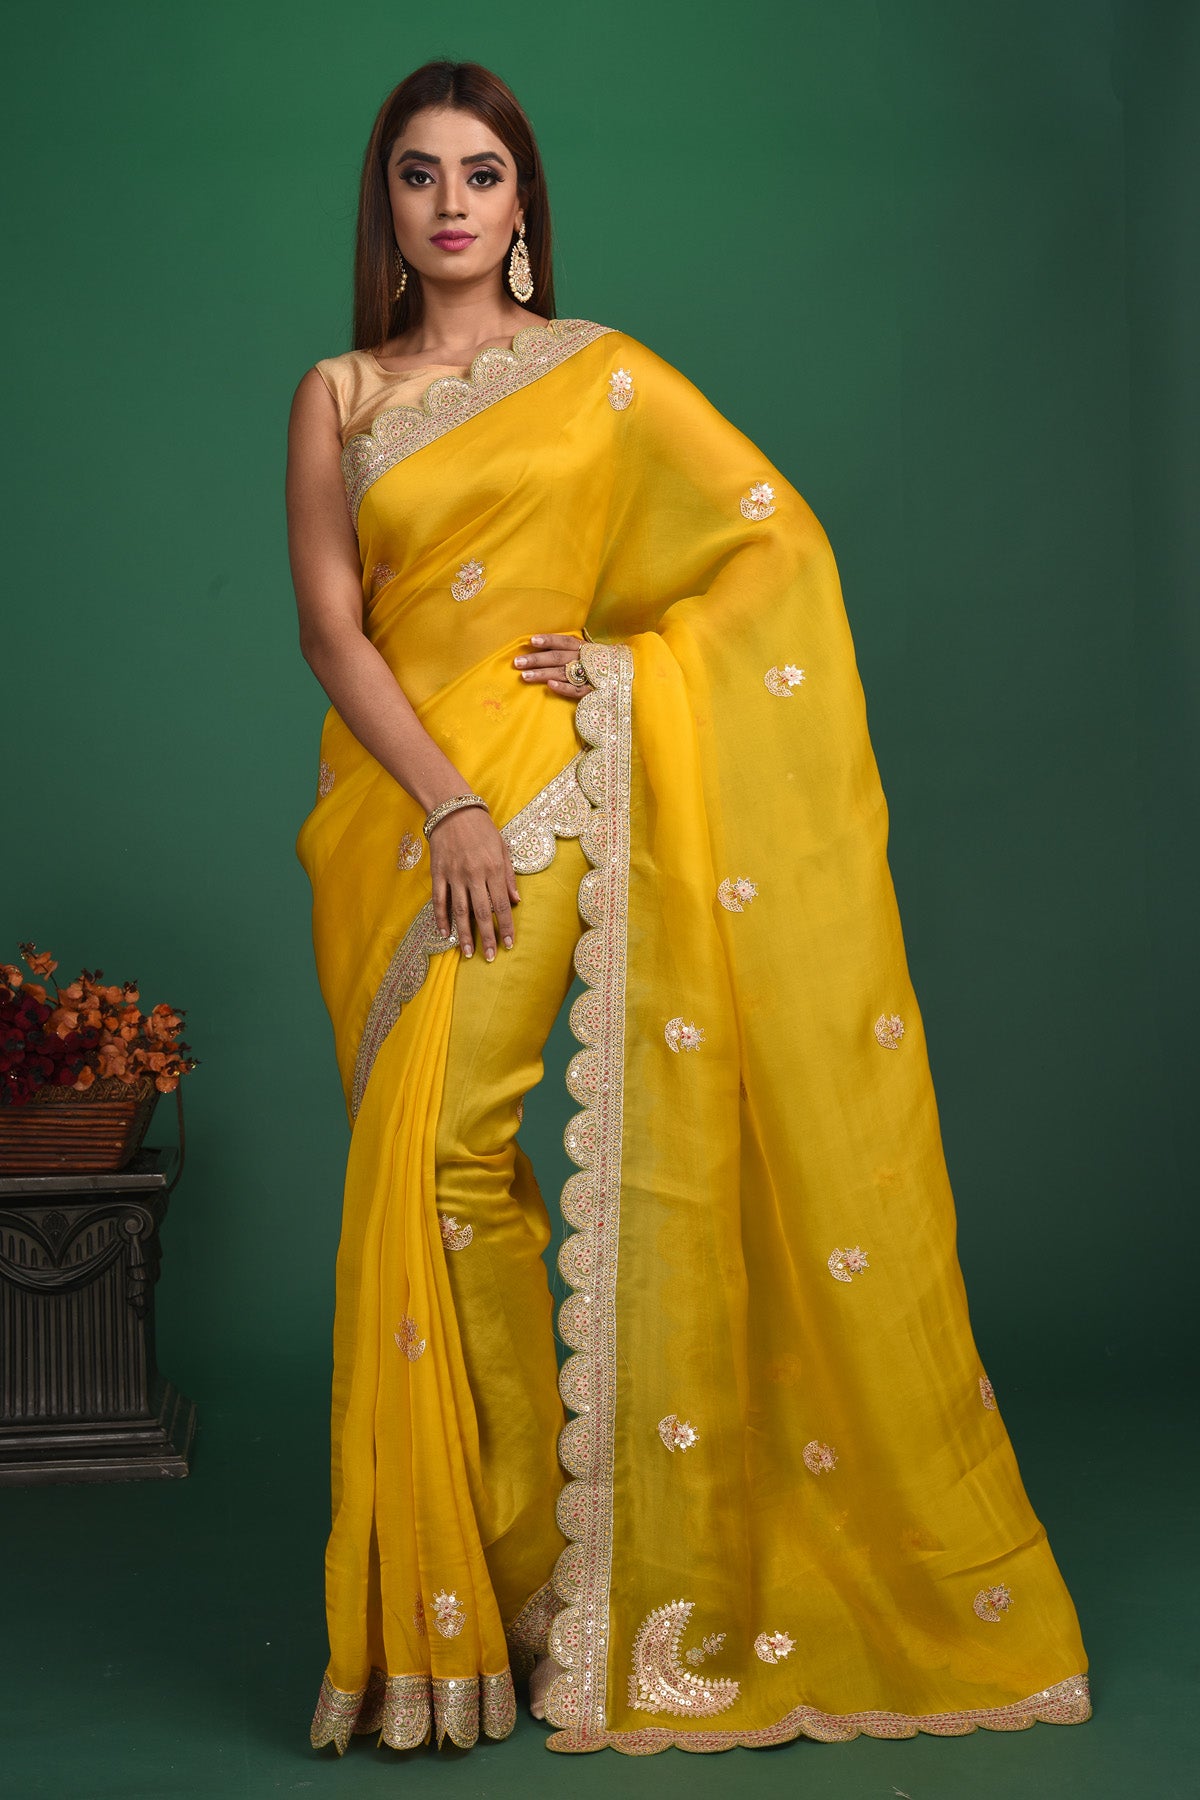 Buy stunning mango yellow embroidered organza saree online in USA. Be a vision of style and elegance at parties and special occasions in beautiful designer sarees, embroidered sarees, printed sarees, satin saris from Pure Elegance Indian fashion store in USA.-full view